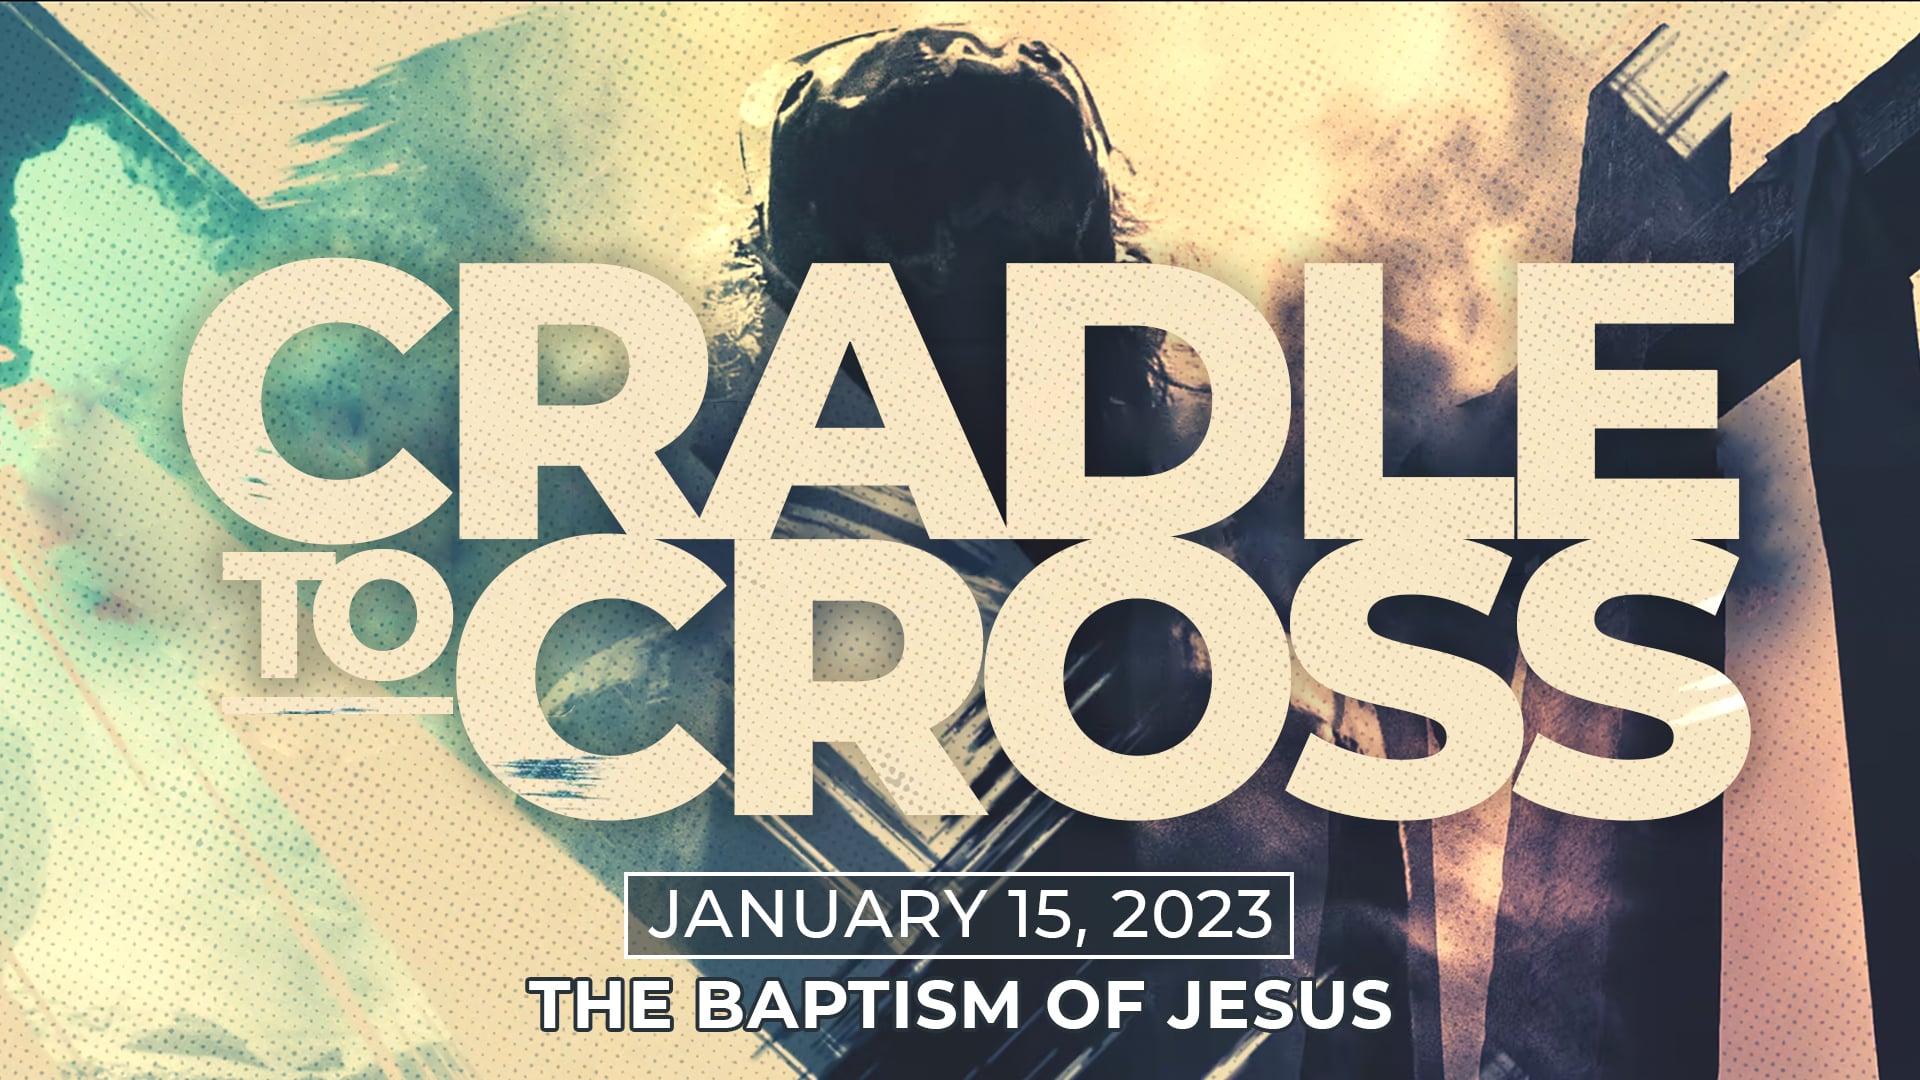 January 15, 2023 - Cradle to Cross: The Baptism of Jesus